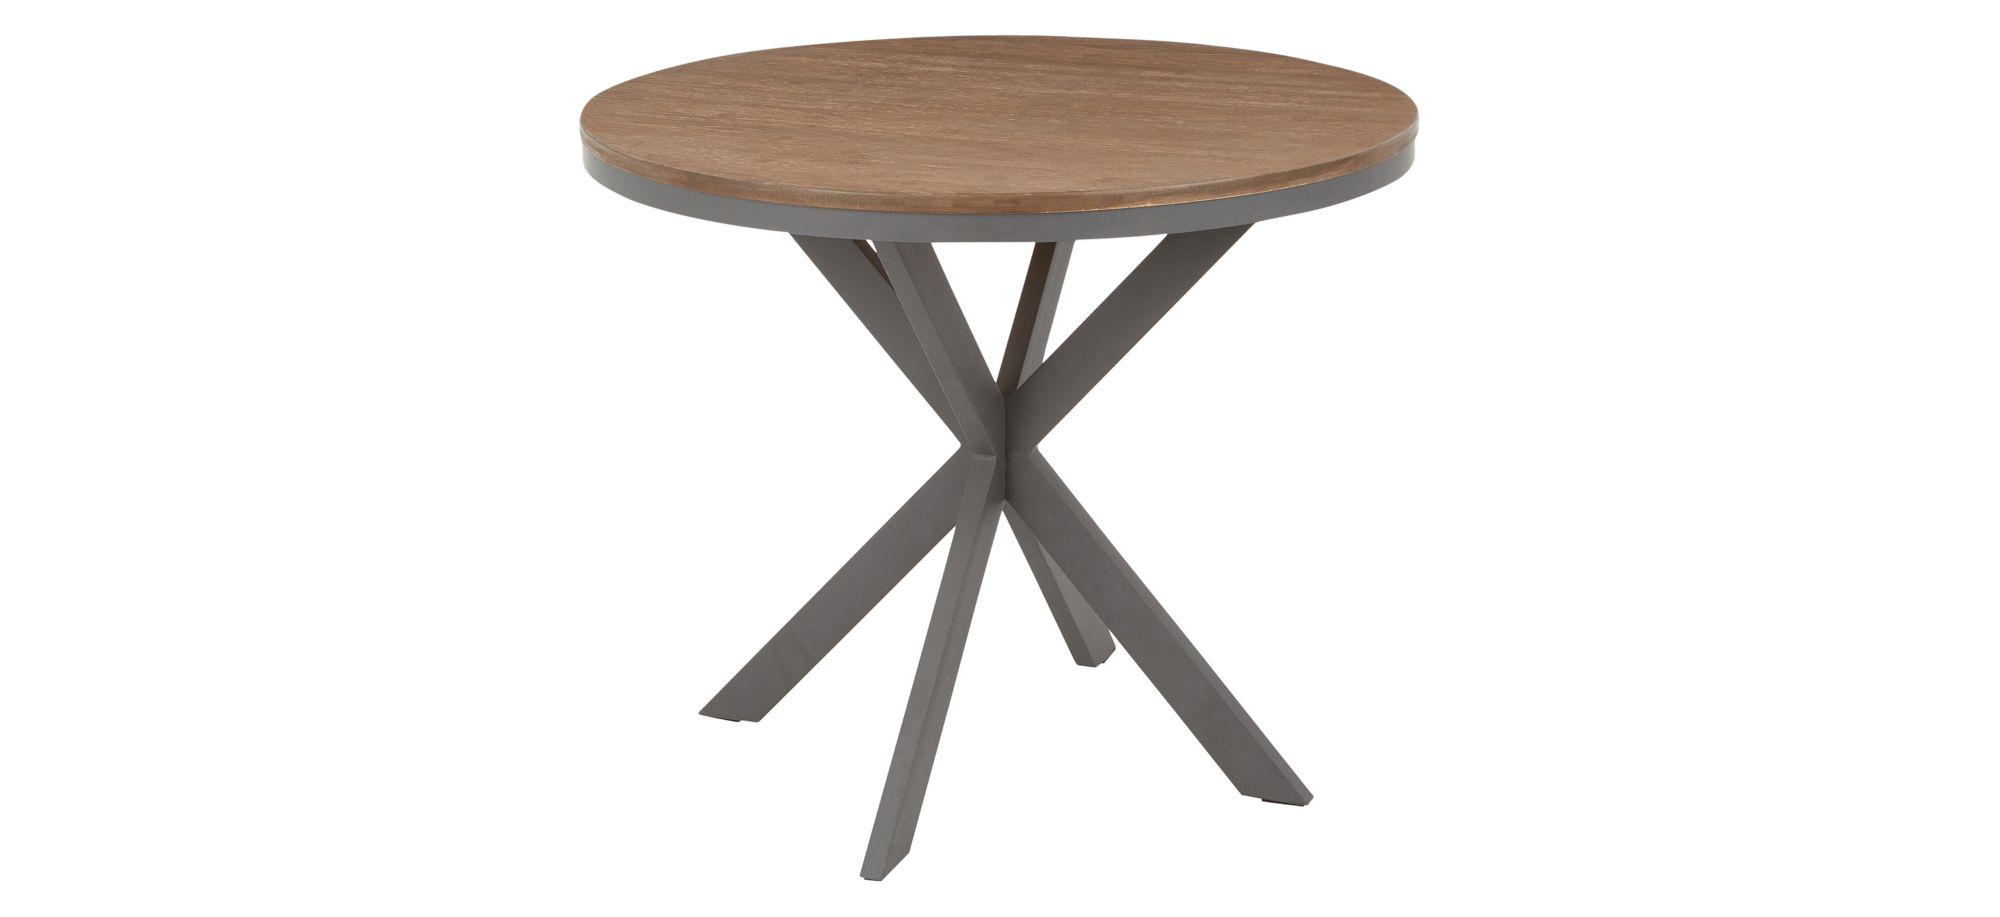 X Pedestal Dinette Table in Grey by Lumisource